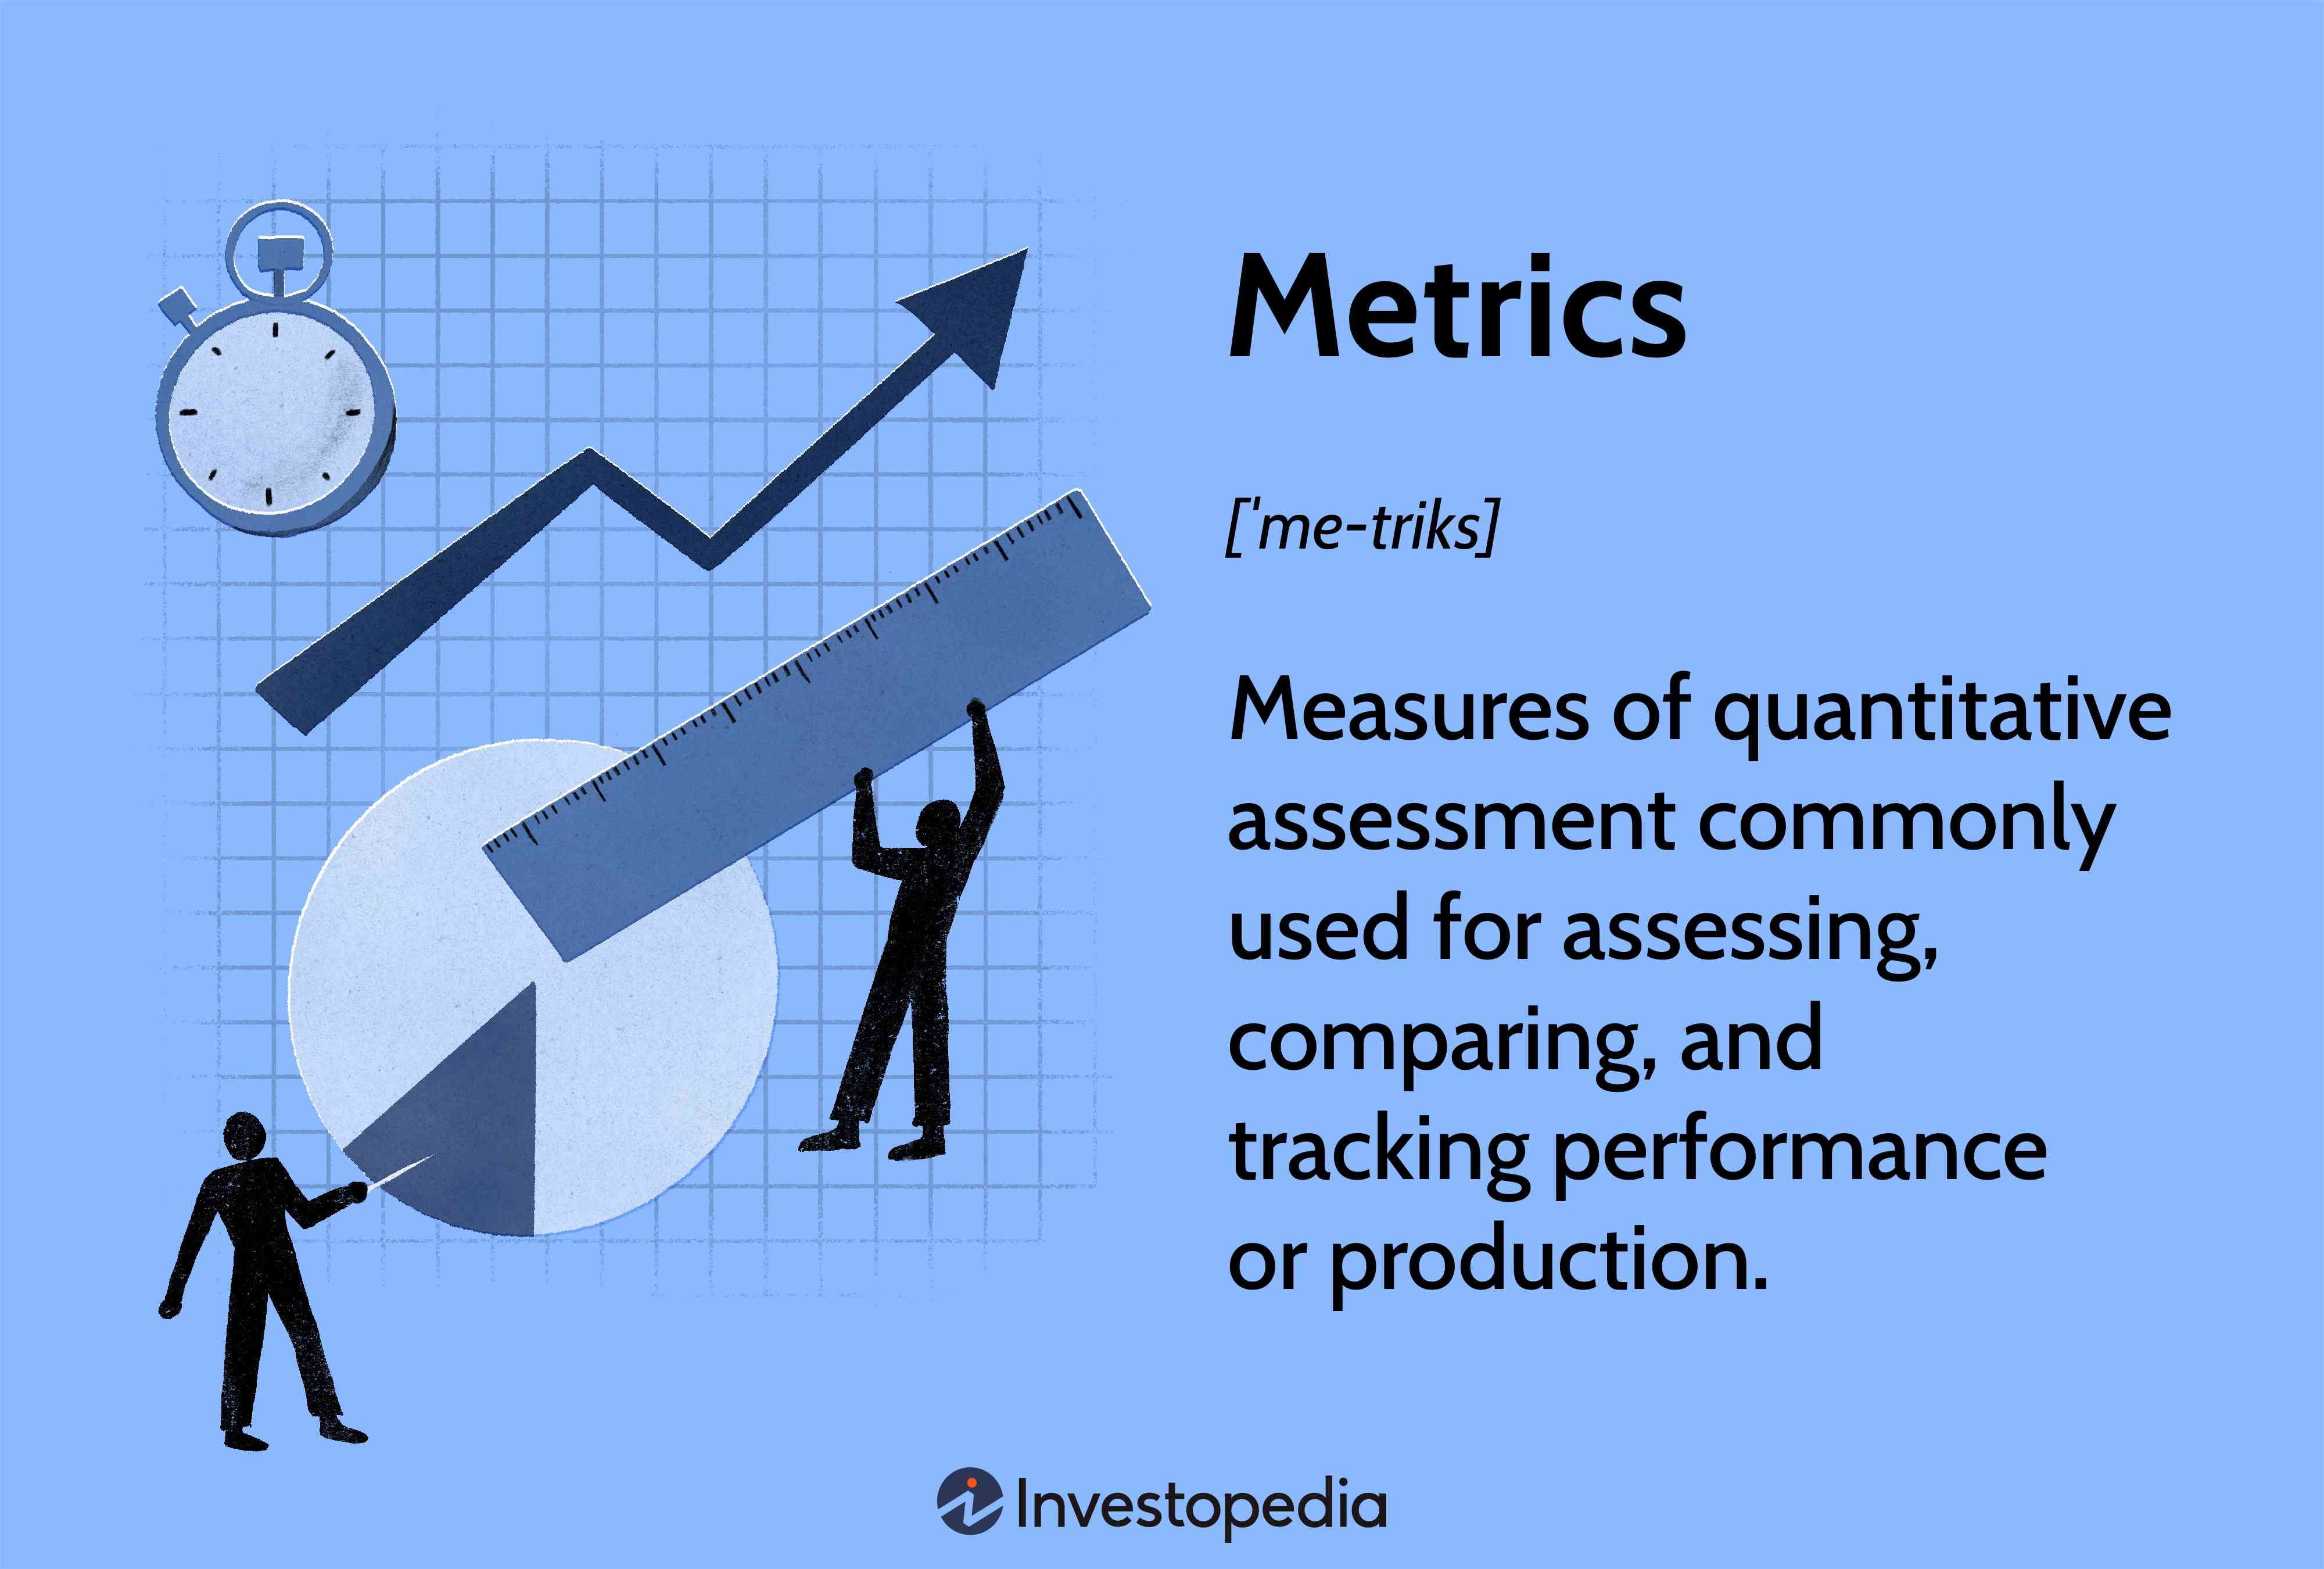 Metrics: Measures of quantitative assessment commonly used for assessing, comparing, and tracking performance or production.